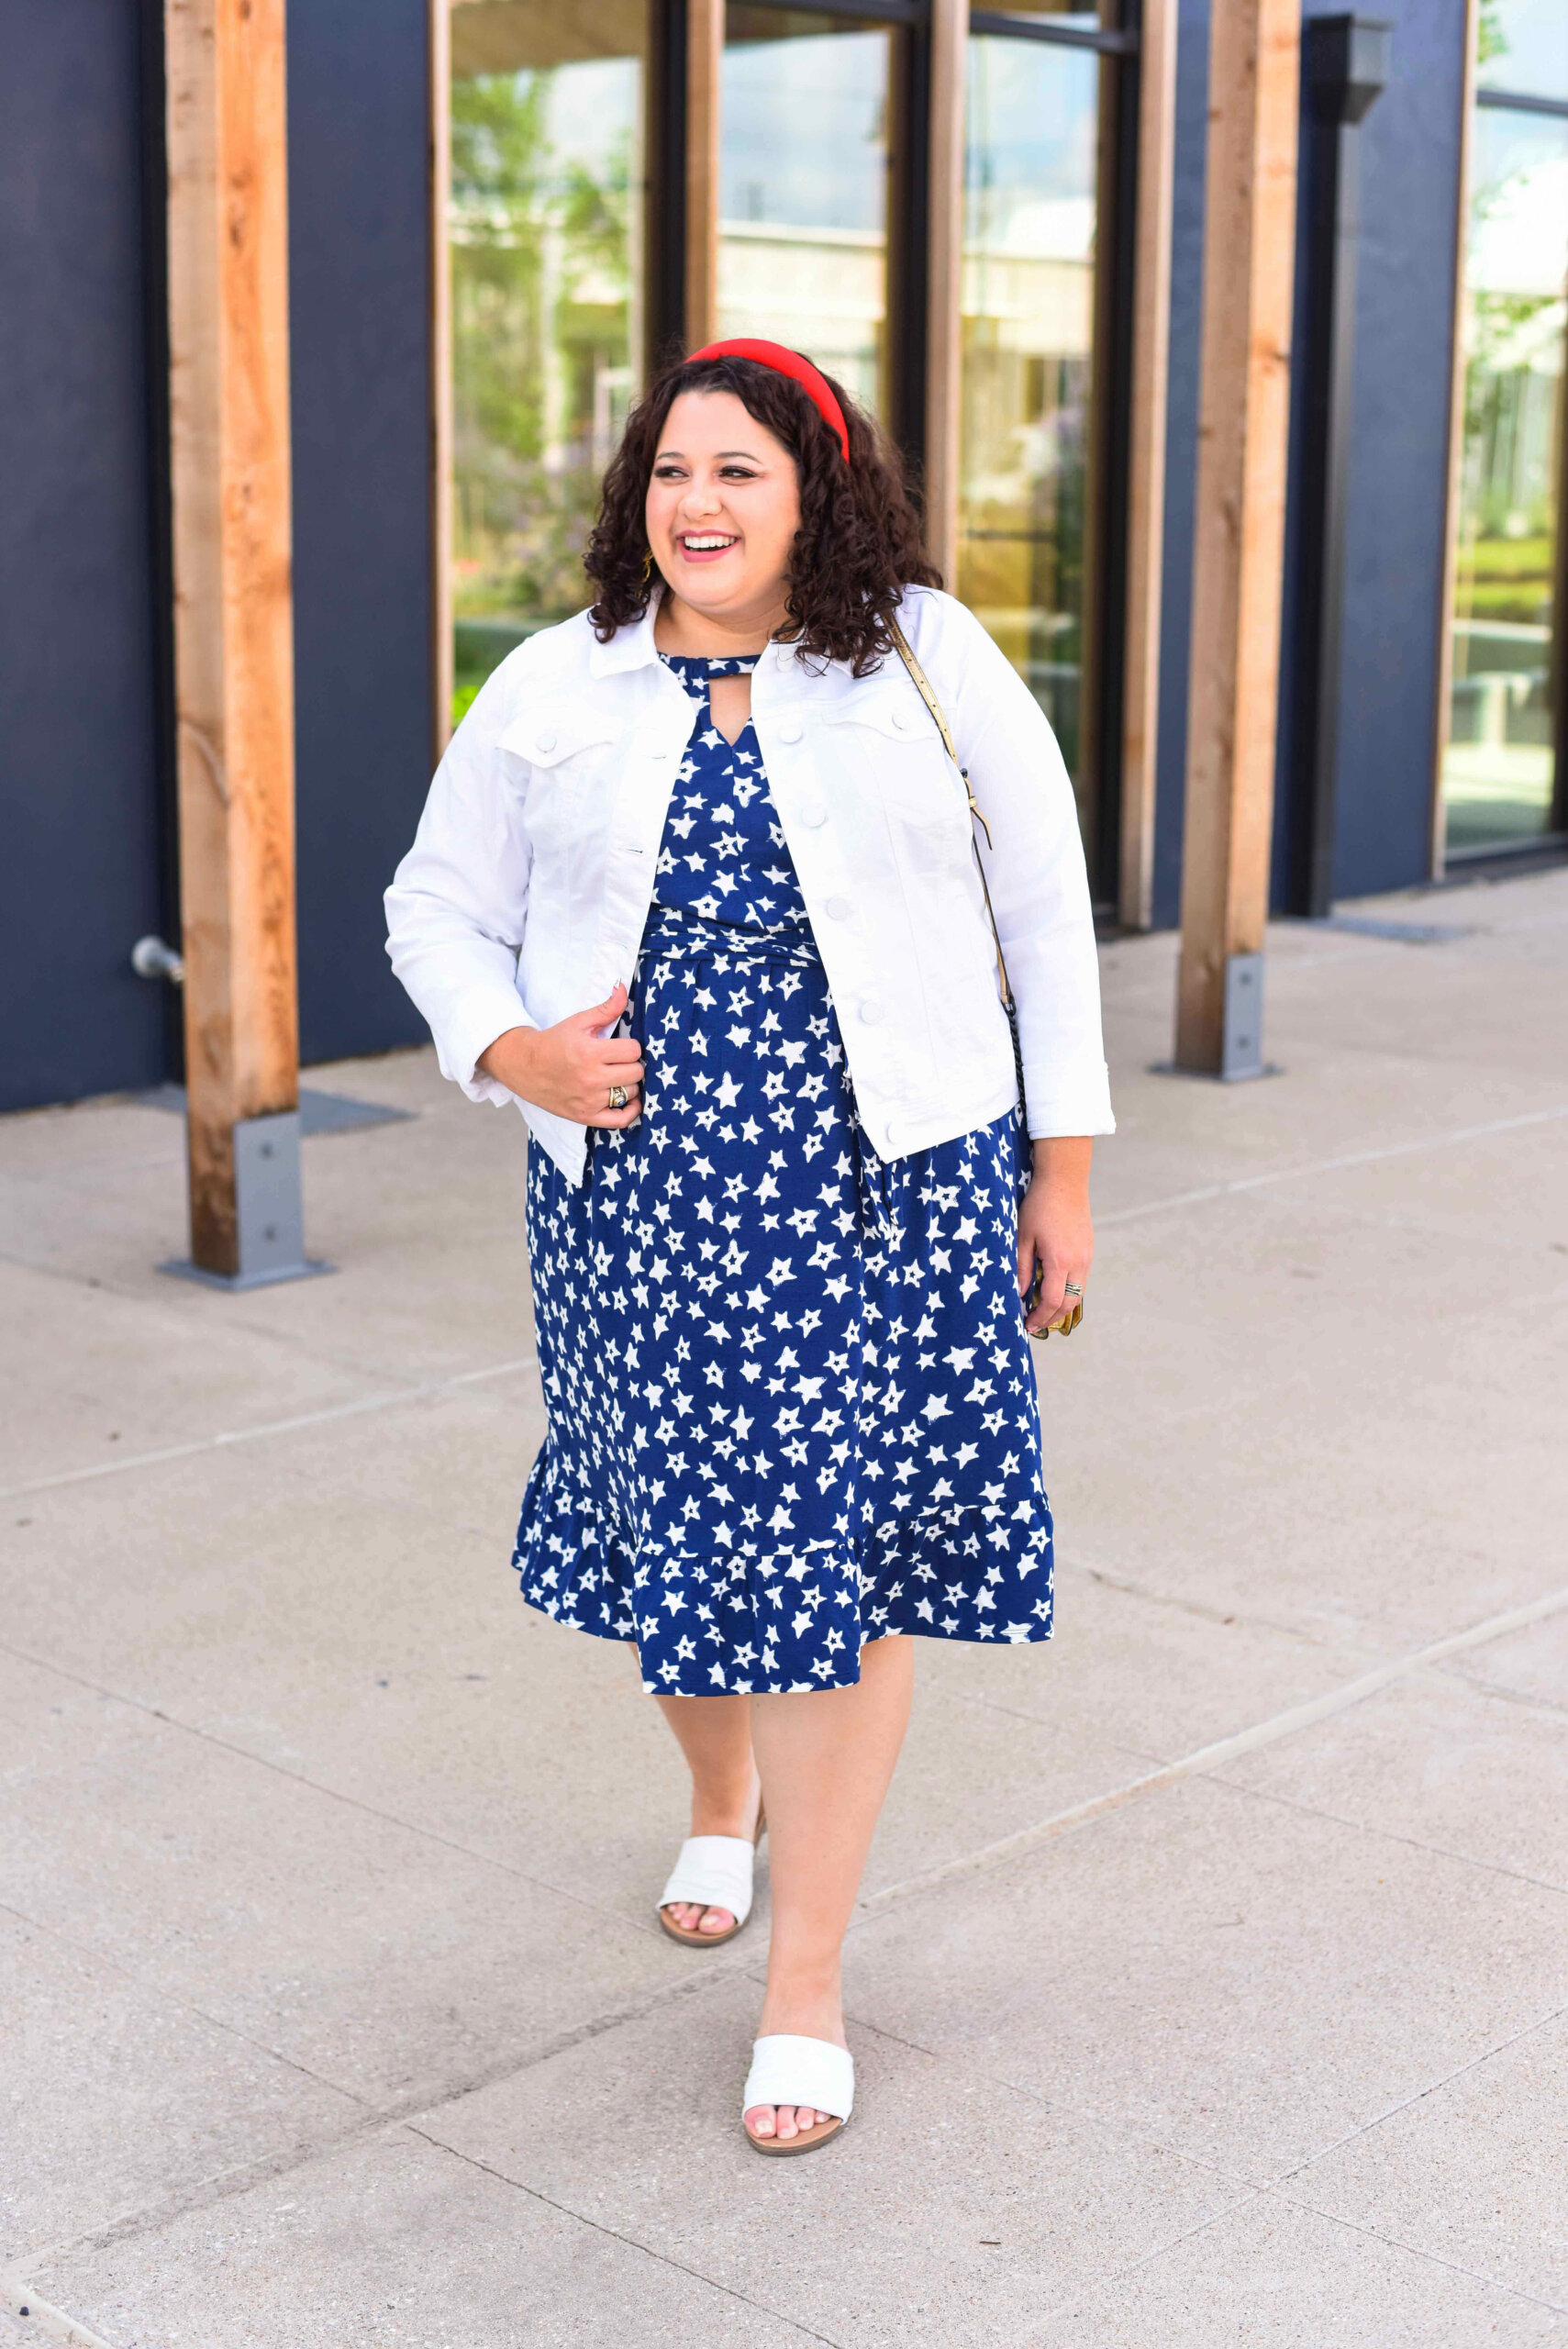 The perfect red, white and blue plus size outfit for Memorial Day or Fourth of July